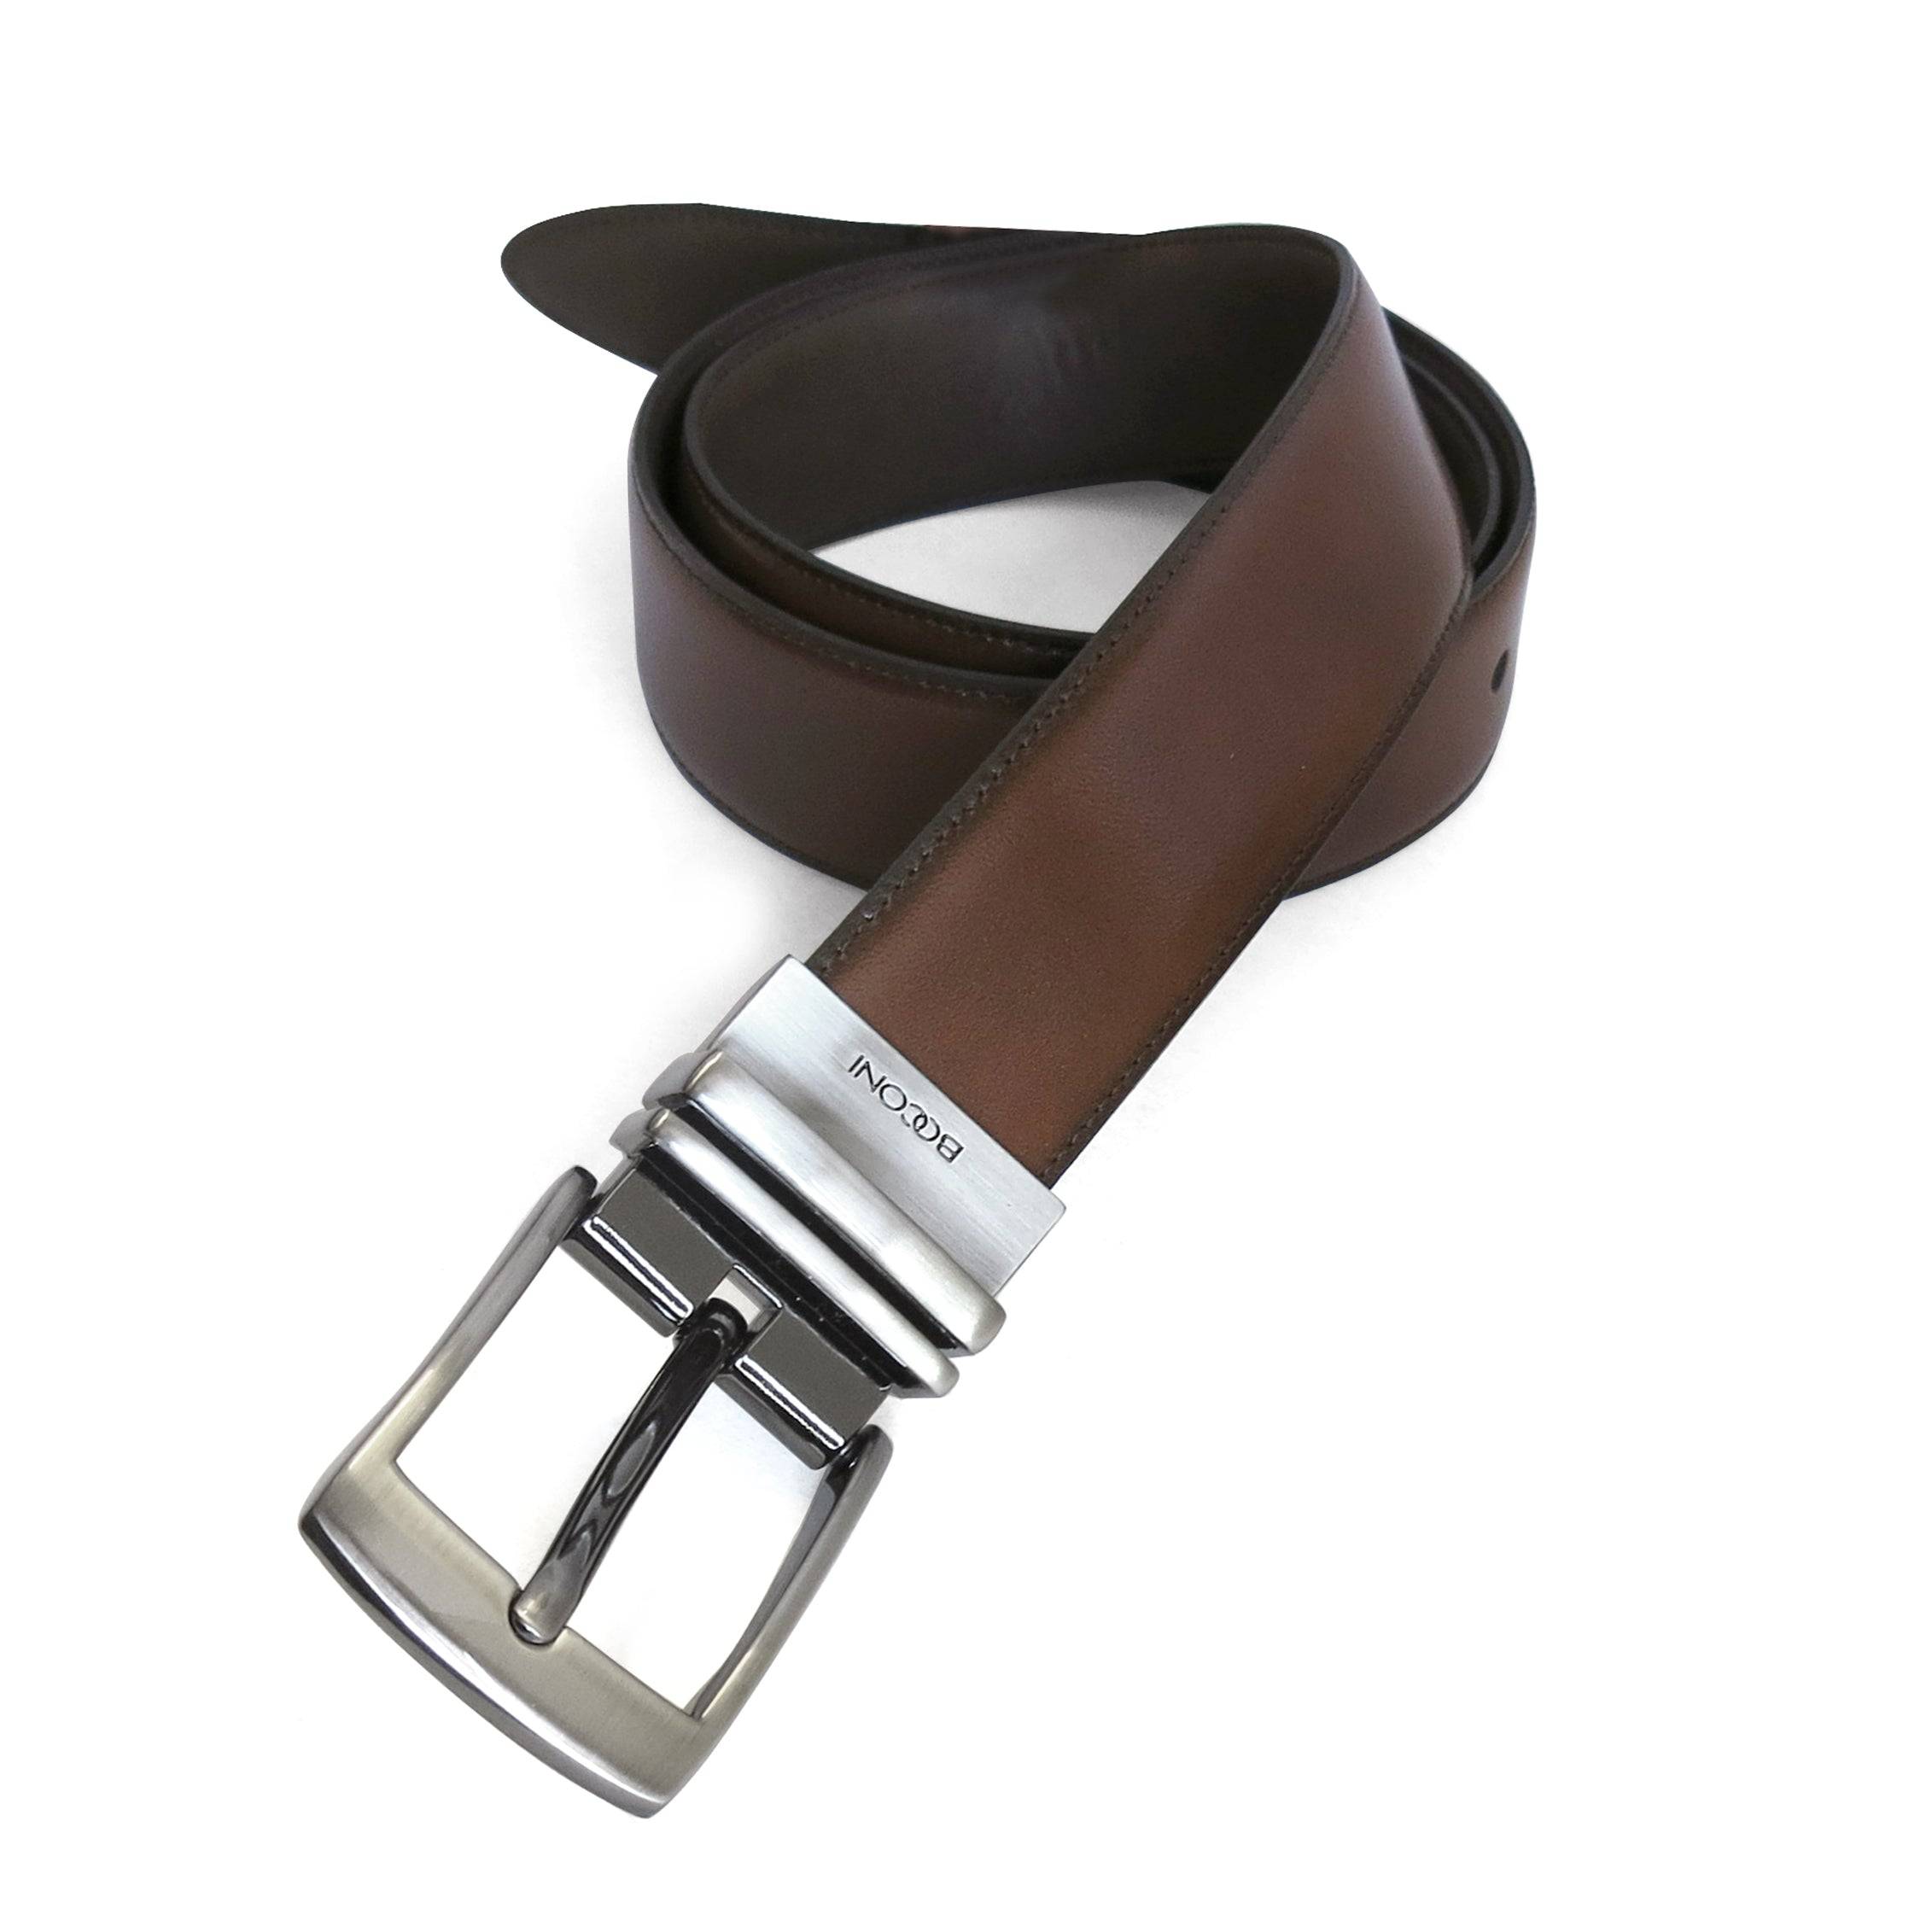 genuine leather reversible belt with metal keepers